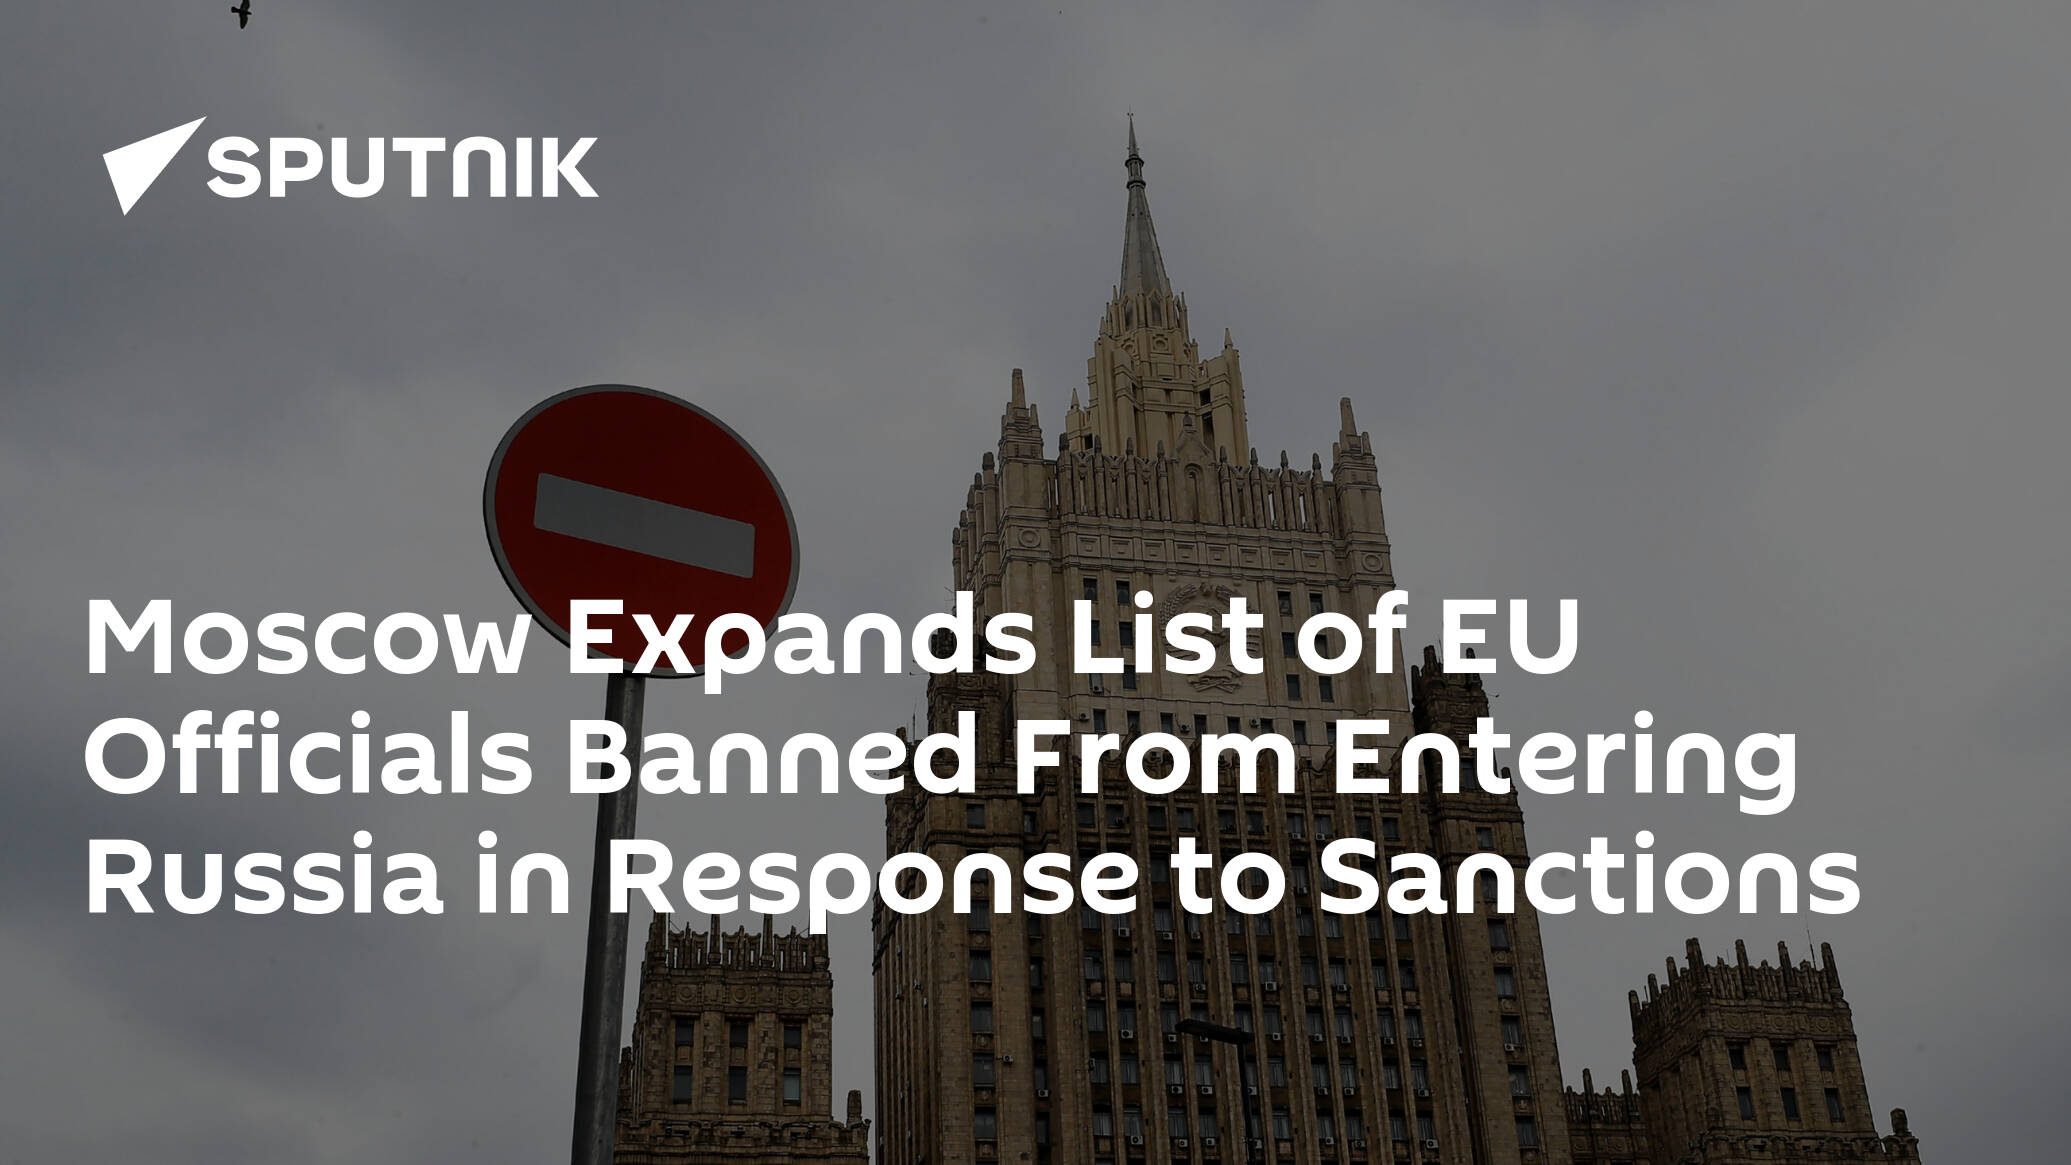 Moscow Expands List of EU Officials Banned From Entering Russia in Response to Sanctions